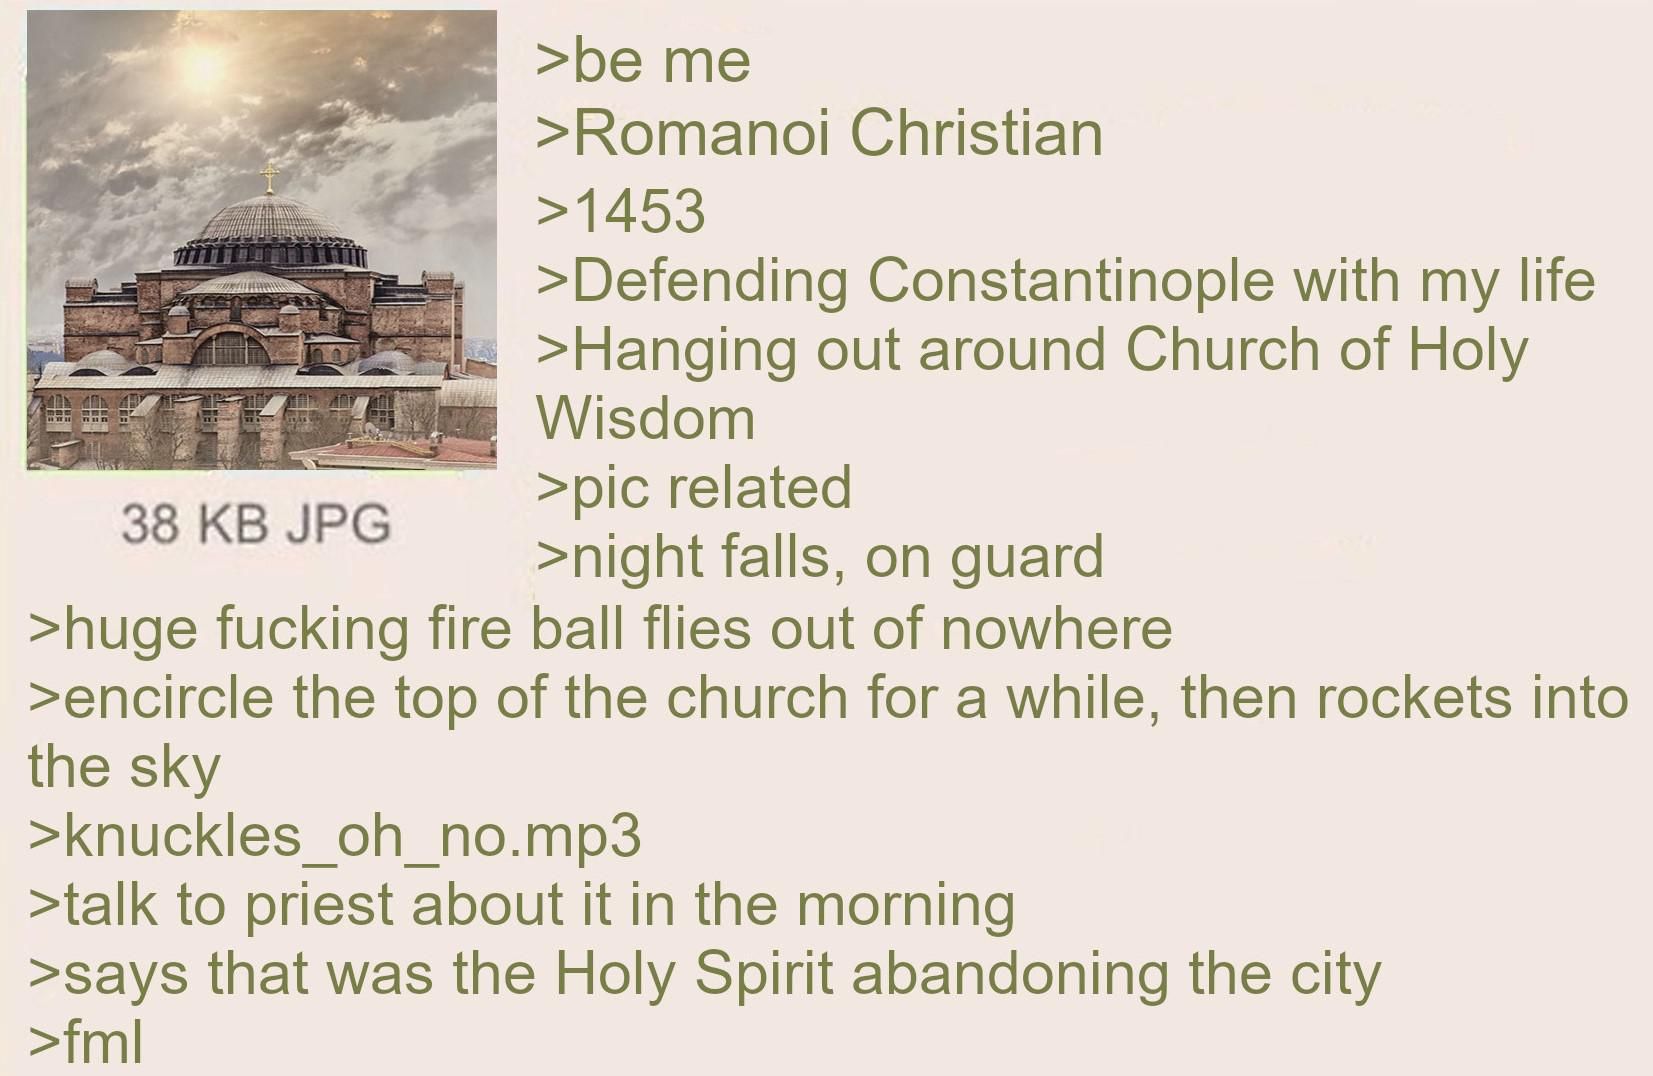 On 21 May 1453, everyone defending Constantinople collectively soiled themselves